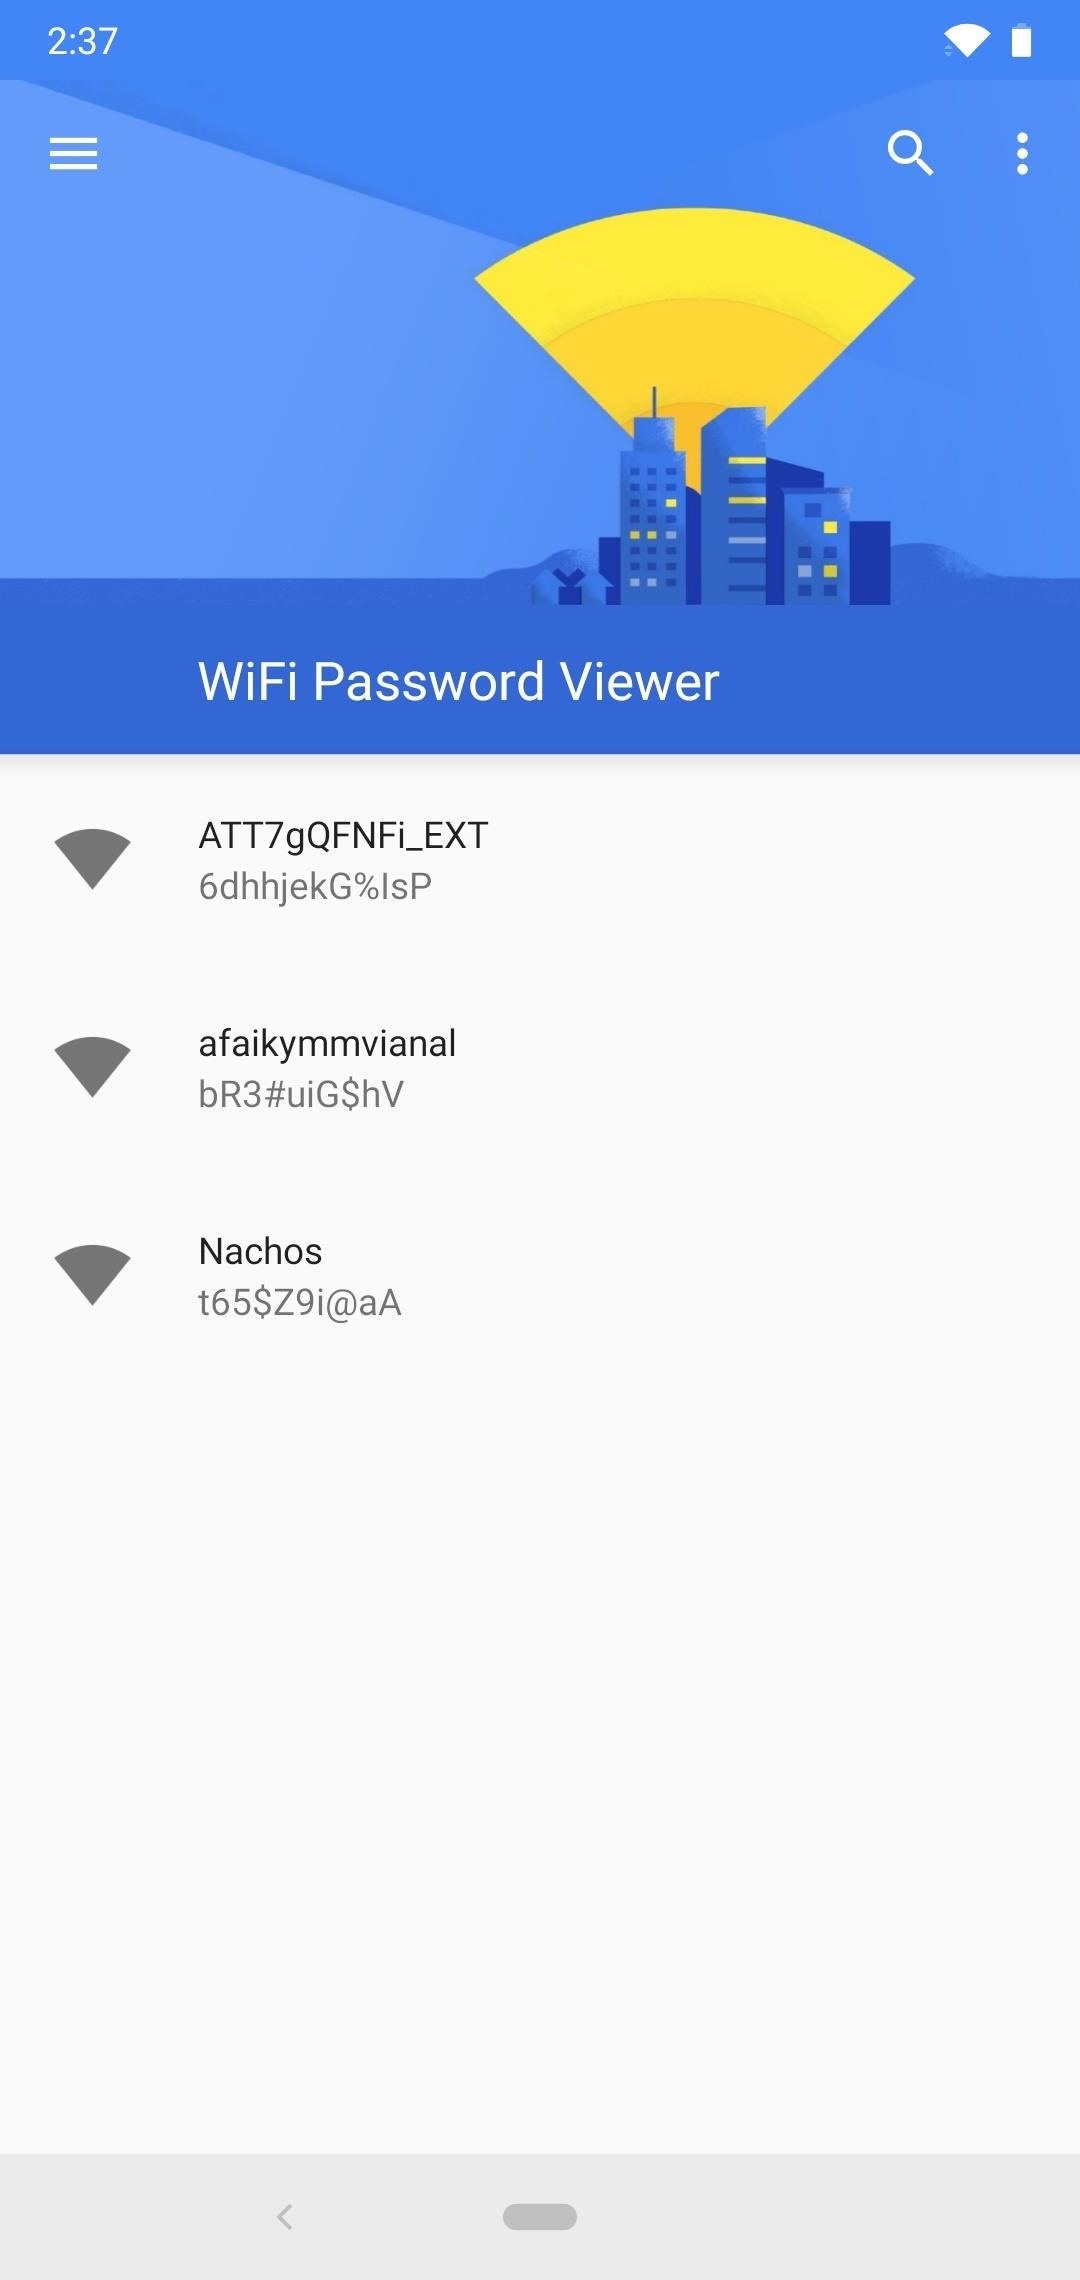 How to See Passwords for Wi-Fi Networks You